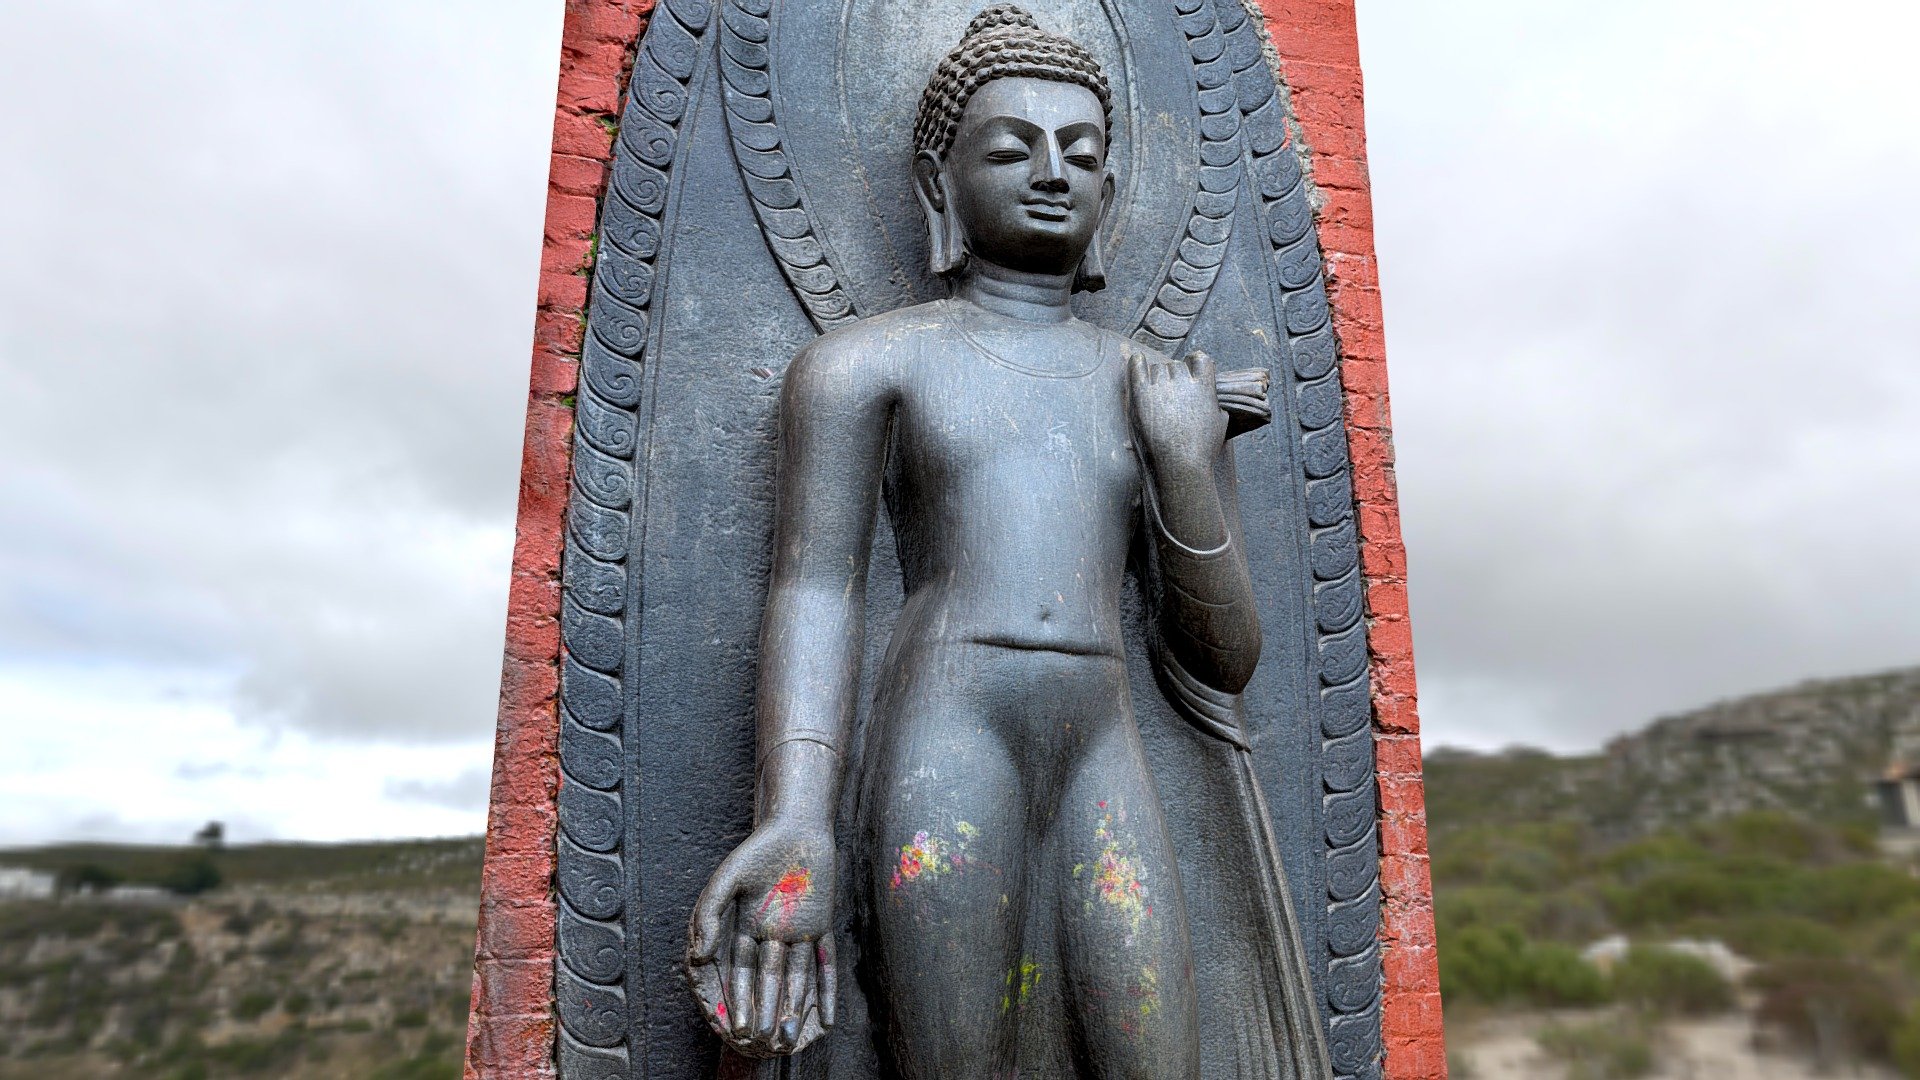 Sculpture of standing Buddha, made up of a single huge granite stone. This piece of history is located at swayambhunath temple in Kathmandu. 

Built in 10th century, it is one of the oldest sculpture at swayambhu. It is located at the front side of the hill, on the old route to the stupa. 
Word &ldquo;swayambhu